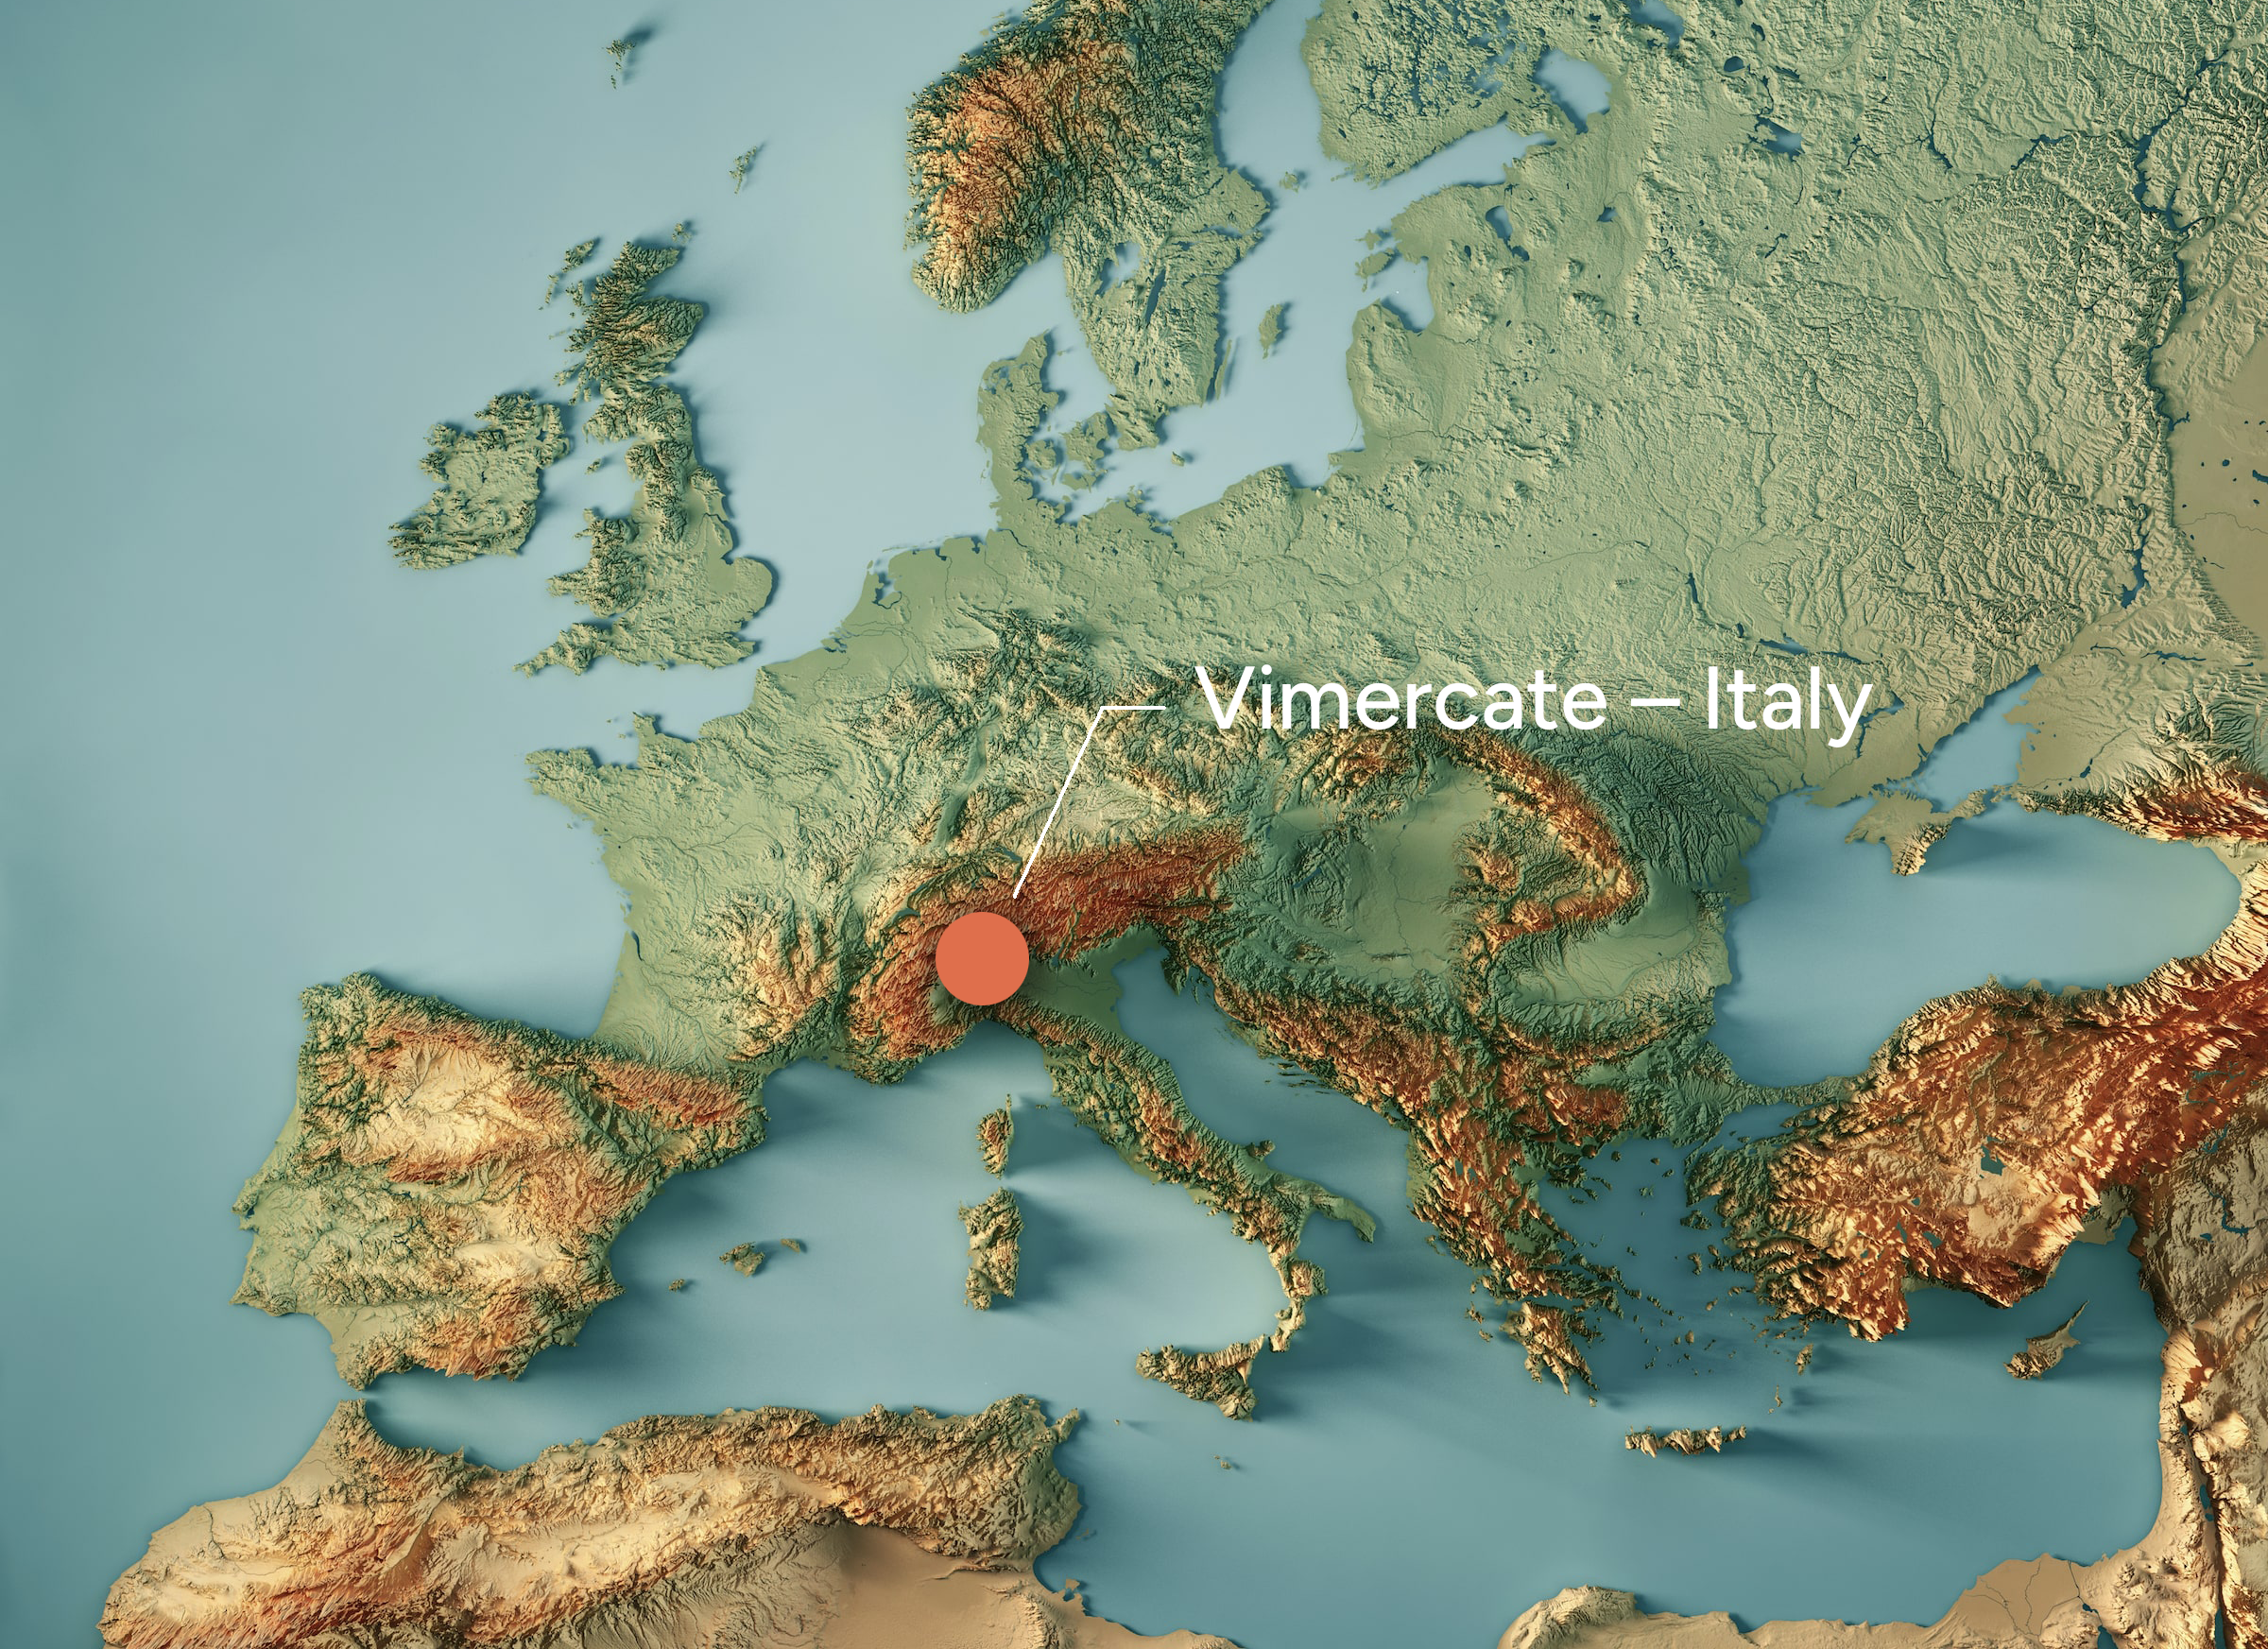 Topography map of Europe highlighting Vimercate, Italy